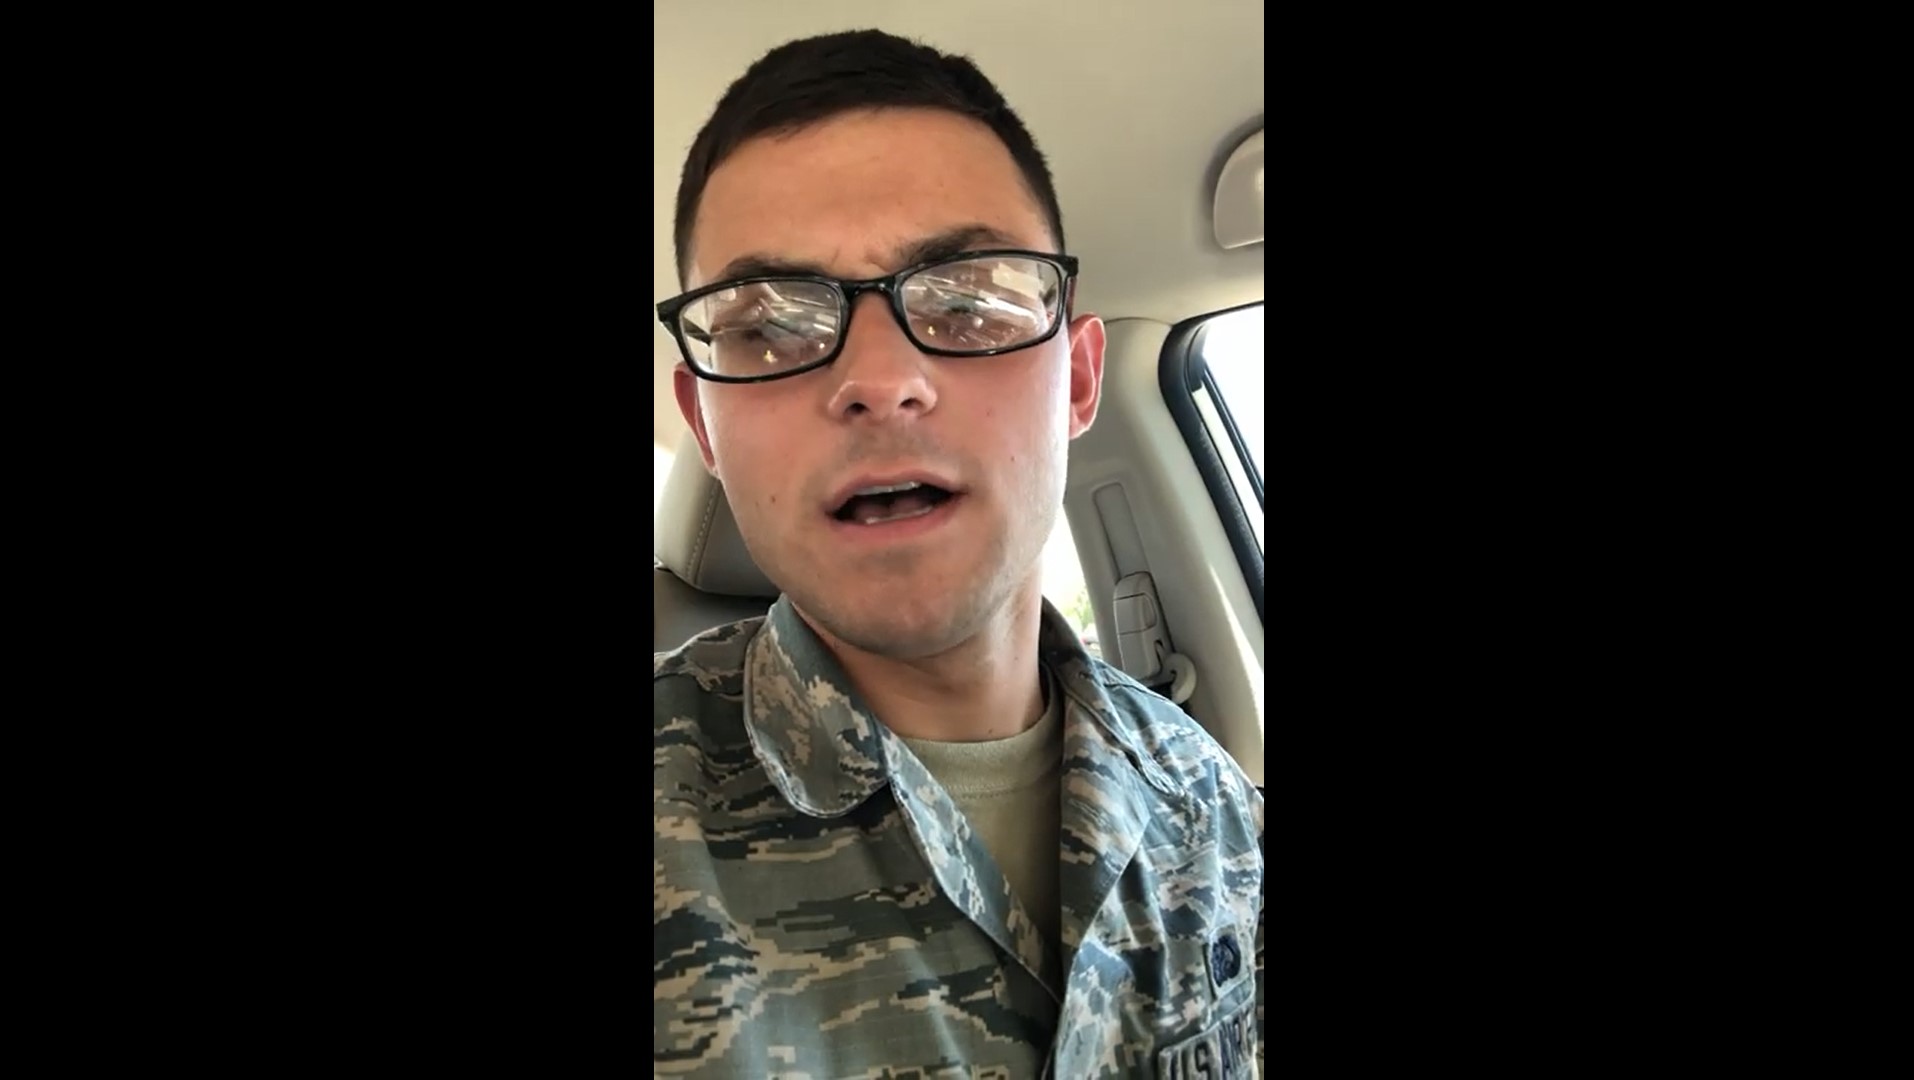 Forcely Sex Videos - Air Force investigating homophobic videos from airman in uniform